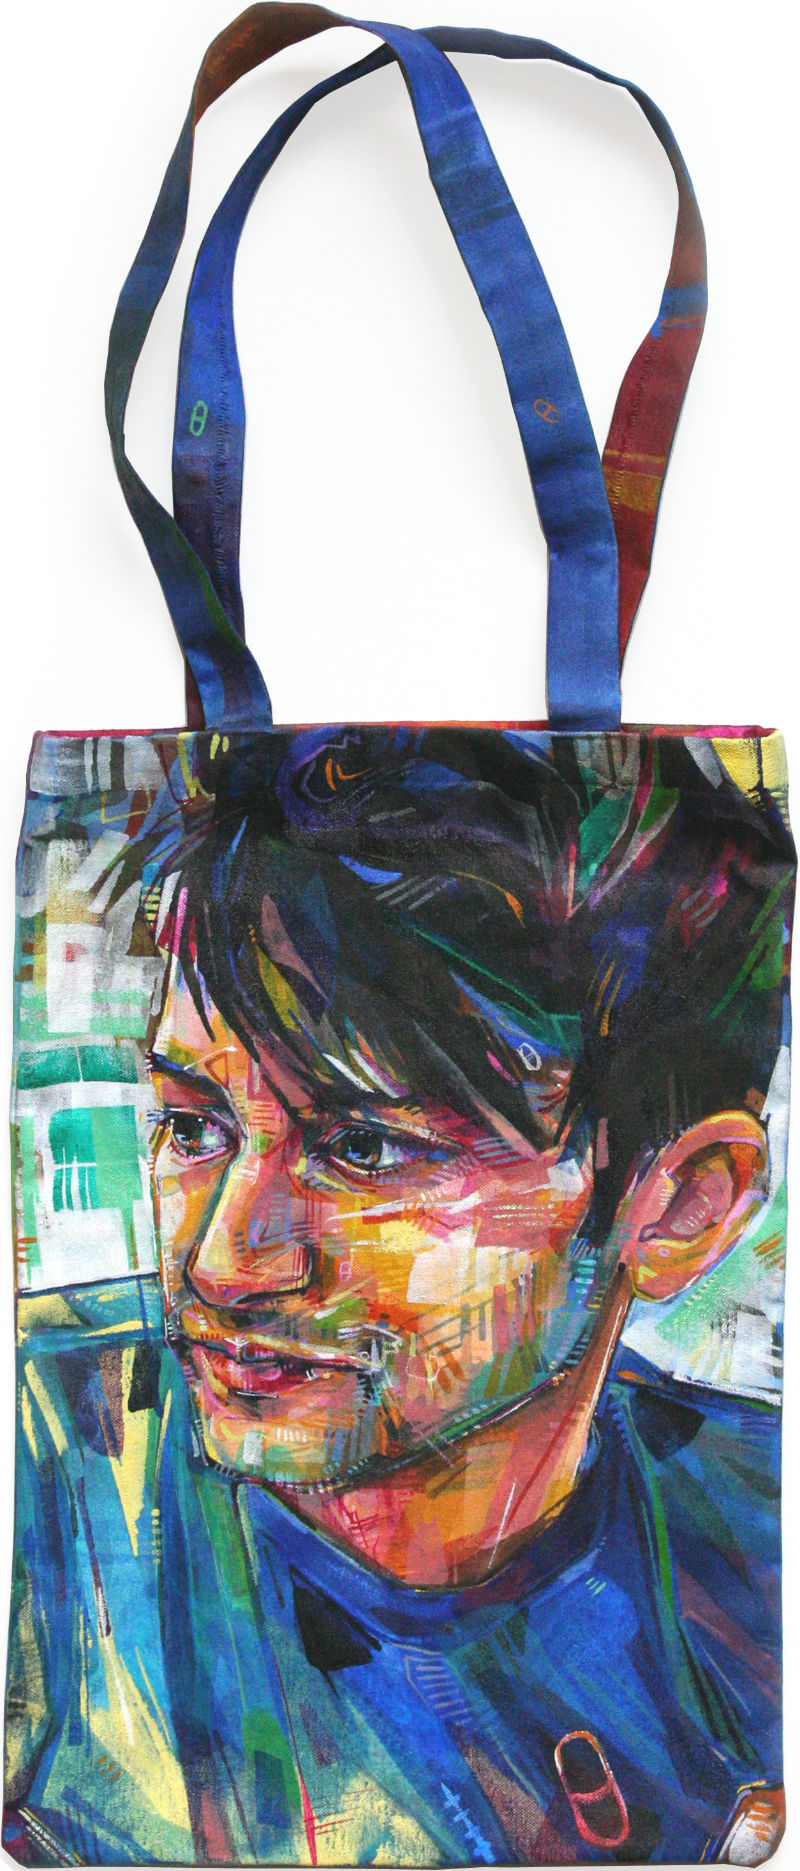 painted portrait bag of Jesse Morgan Young